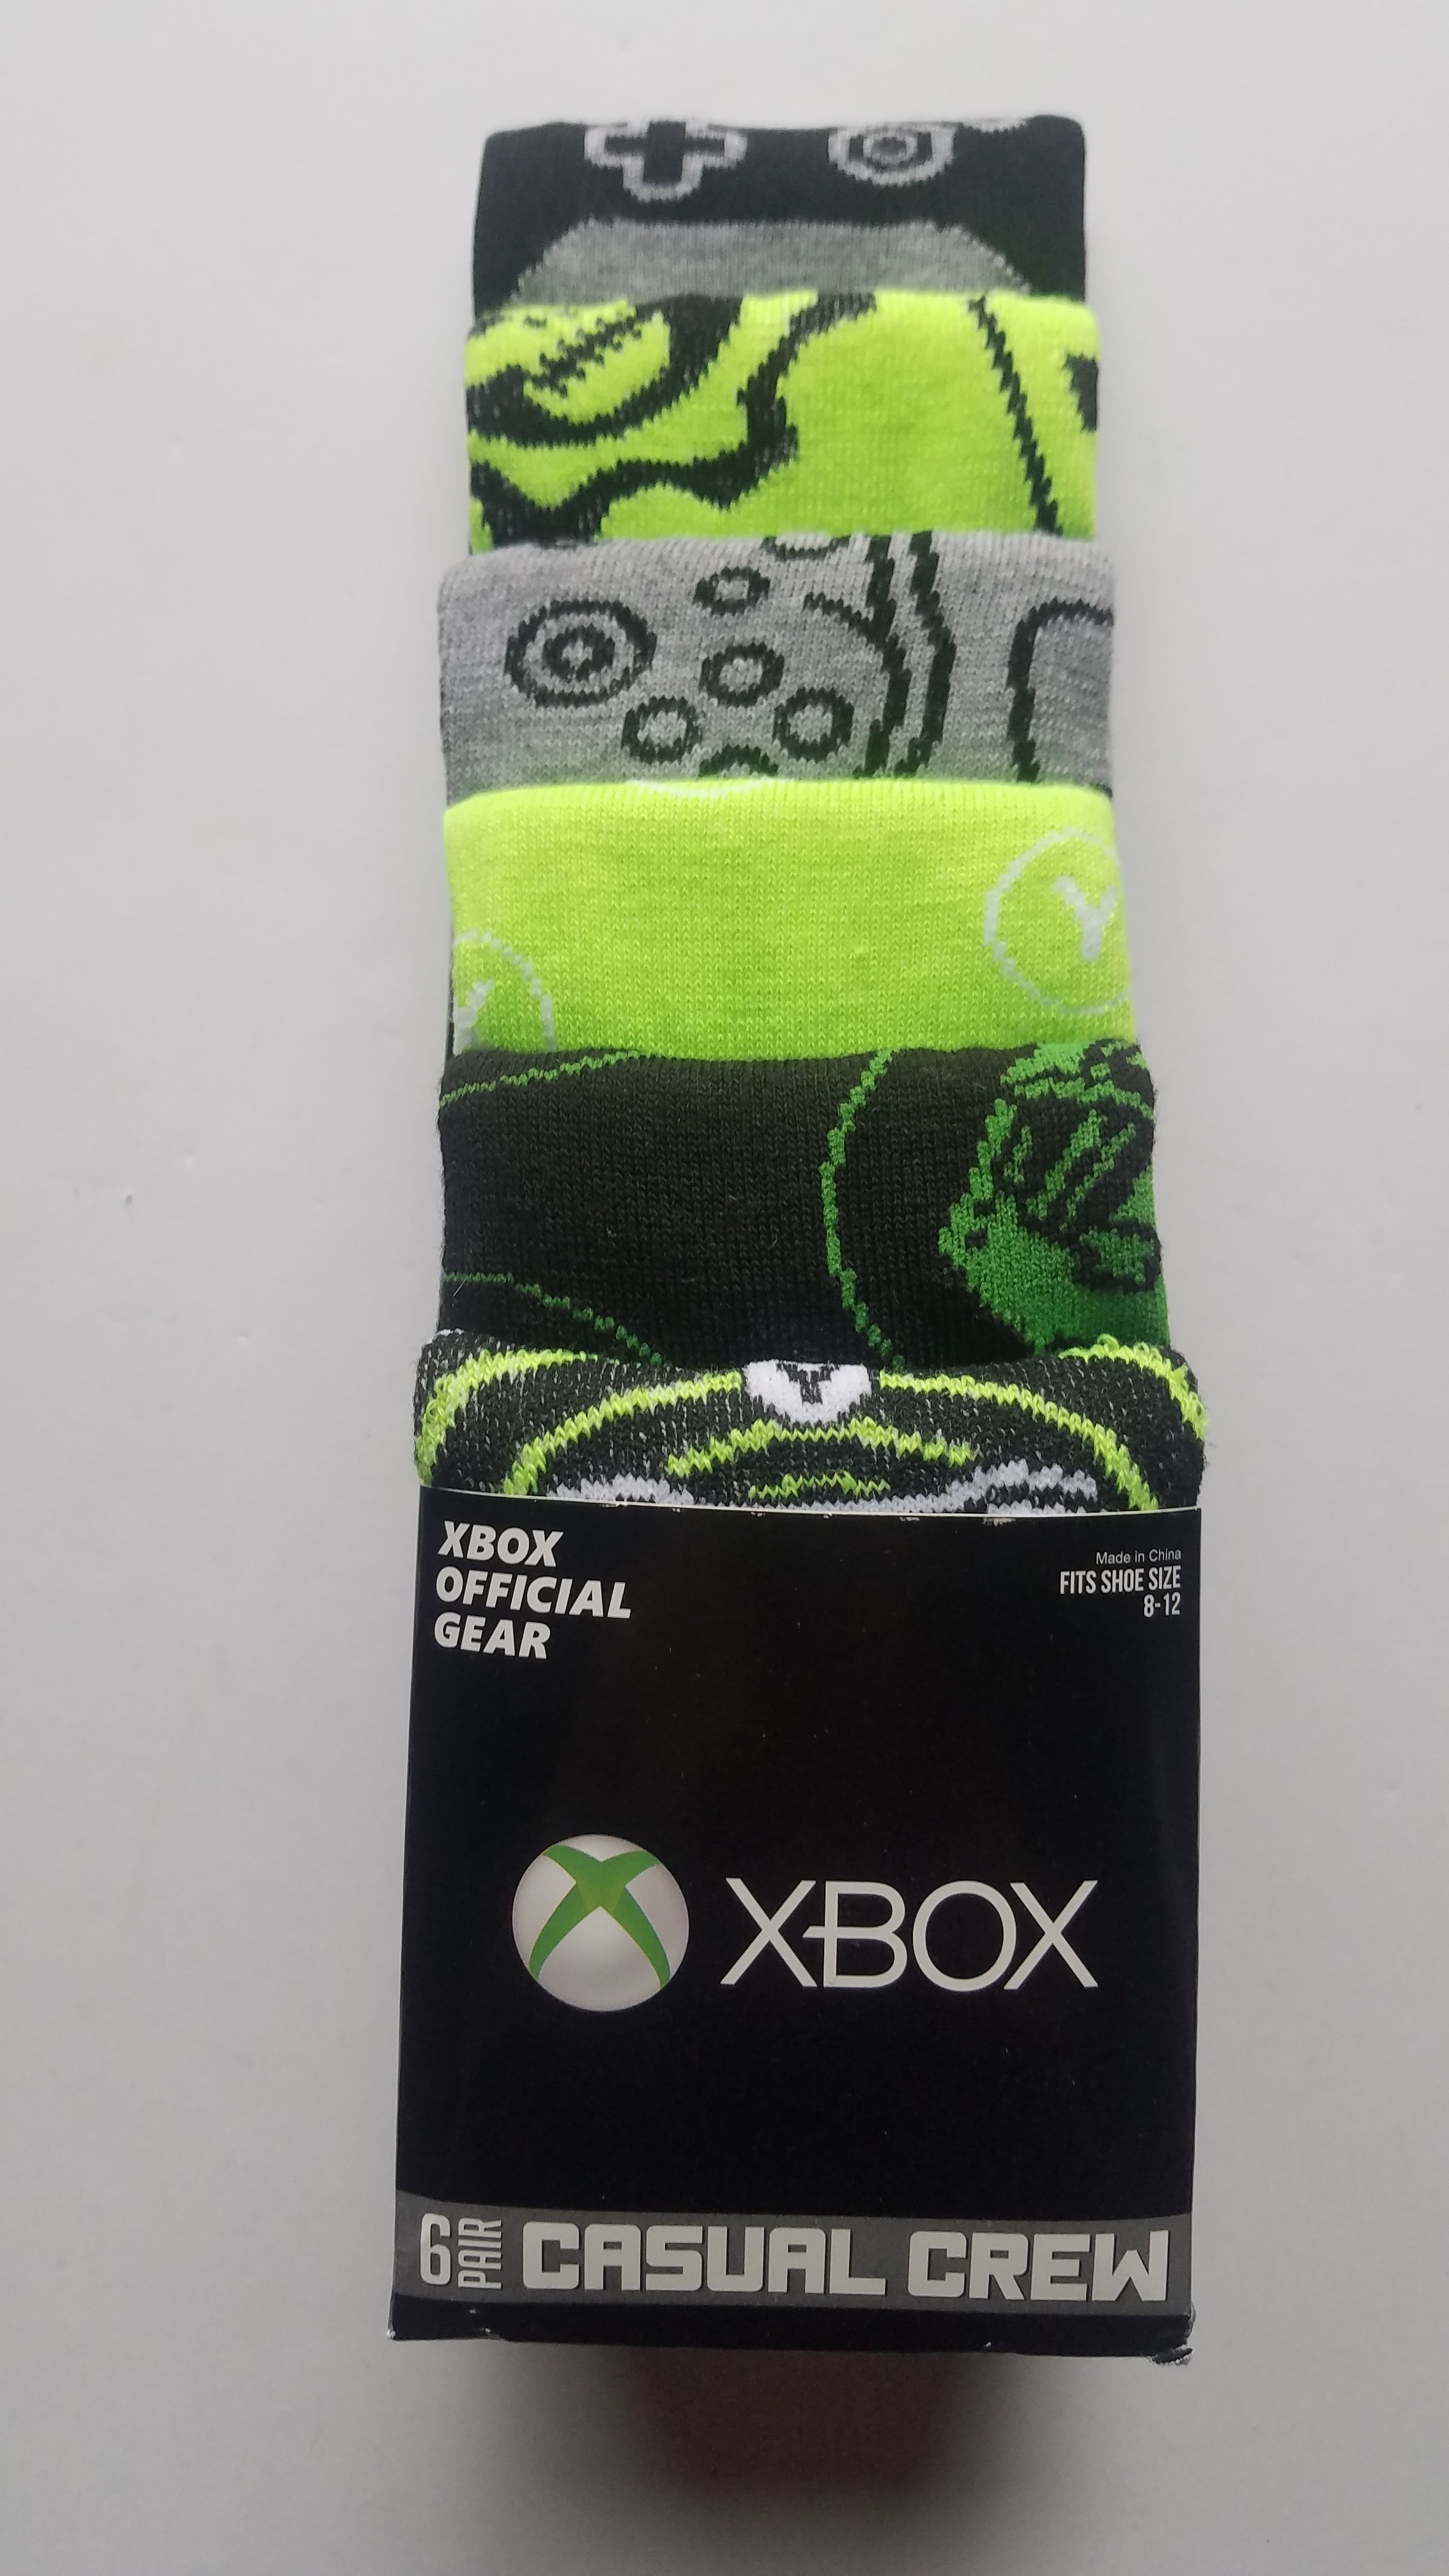 xbox official gear men casual crew socks 6 pack fits shoe size 8 to 12 new